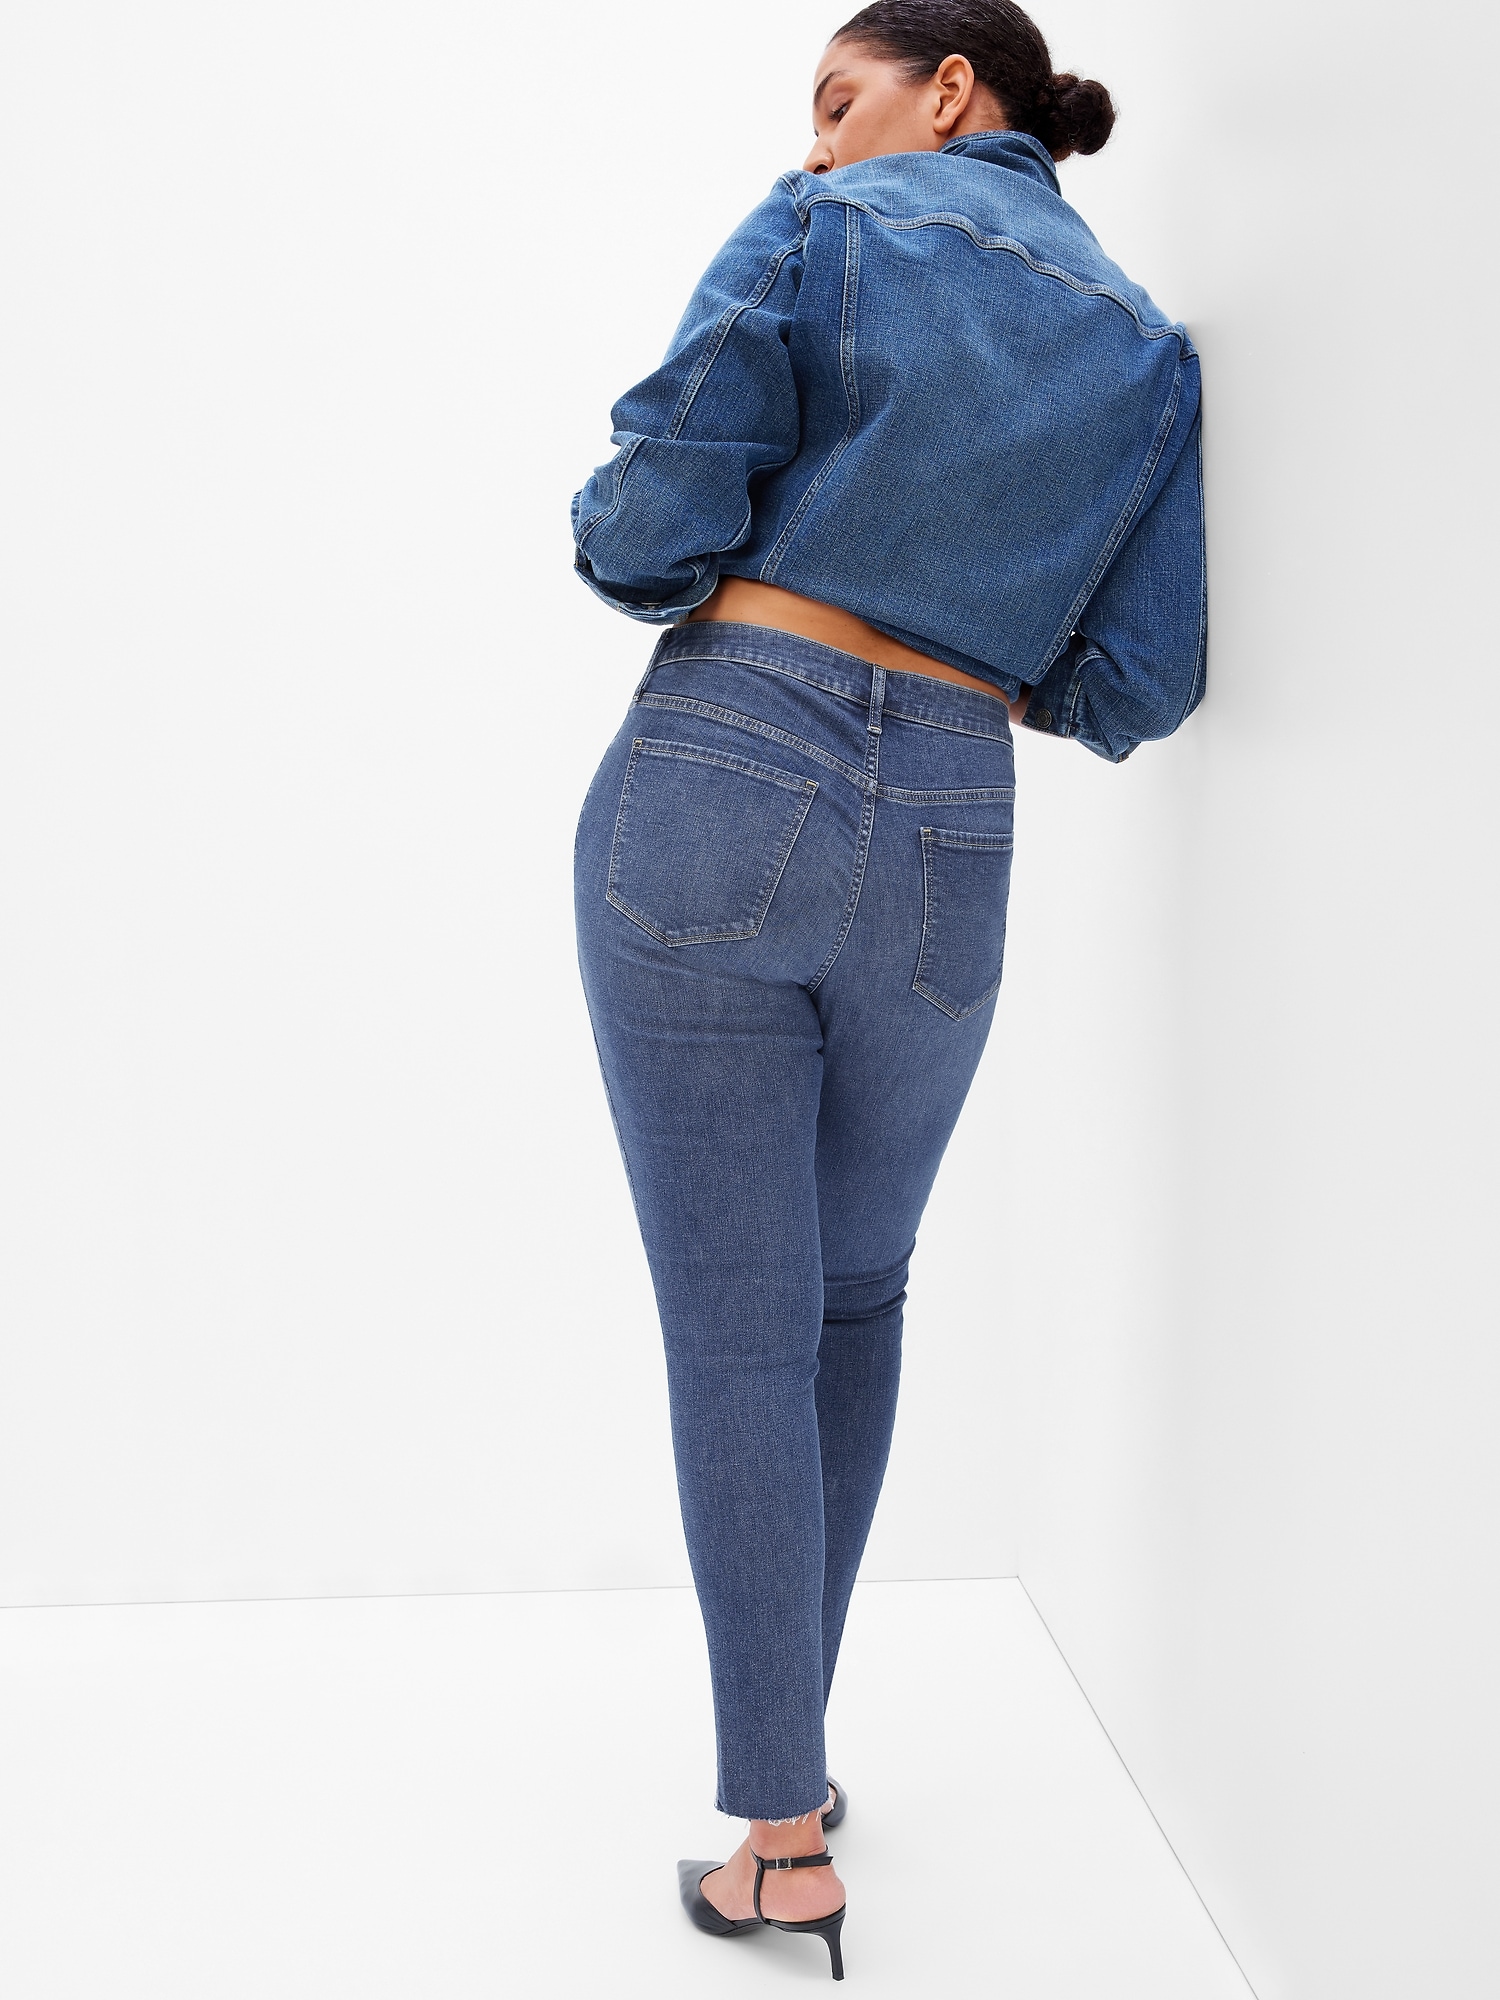 Buy online Blue Solid Mid Rise Full Length Jegging from Jeans